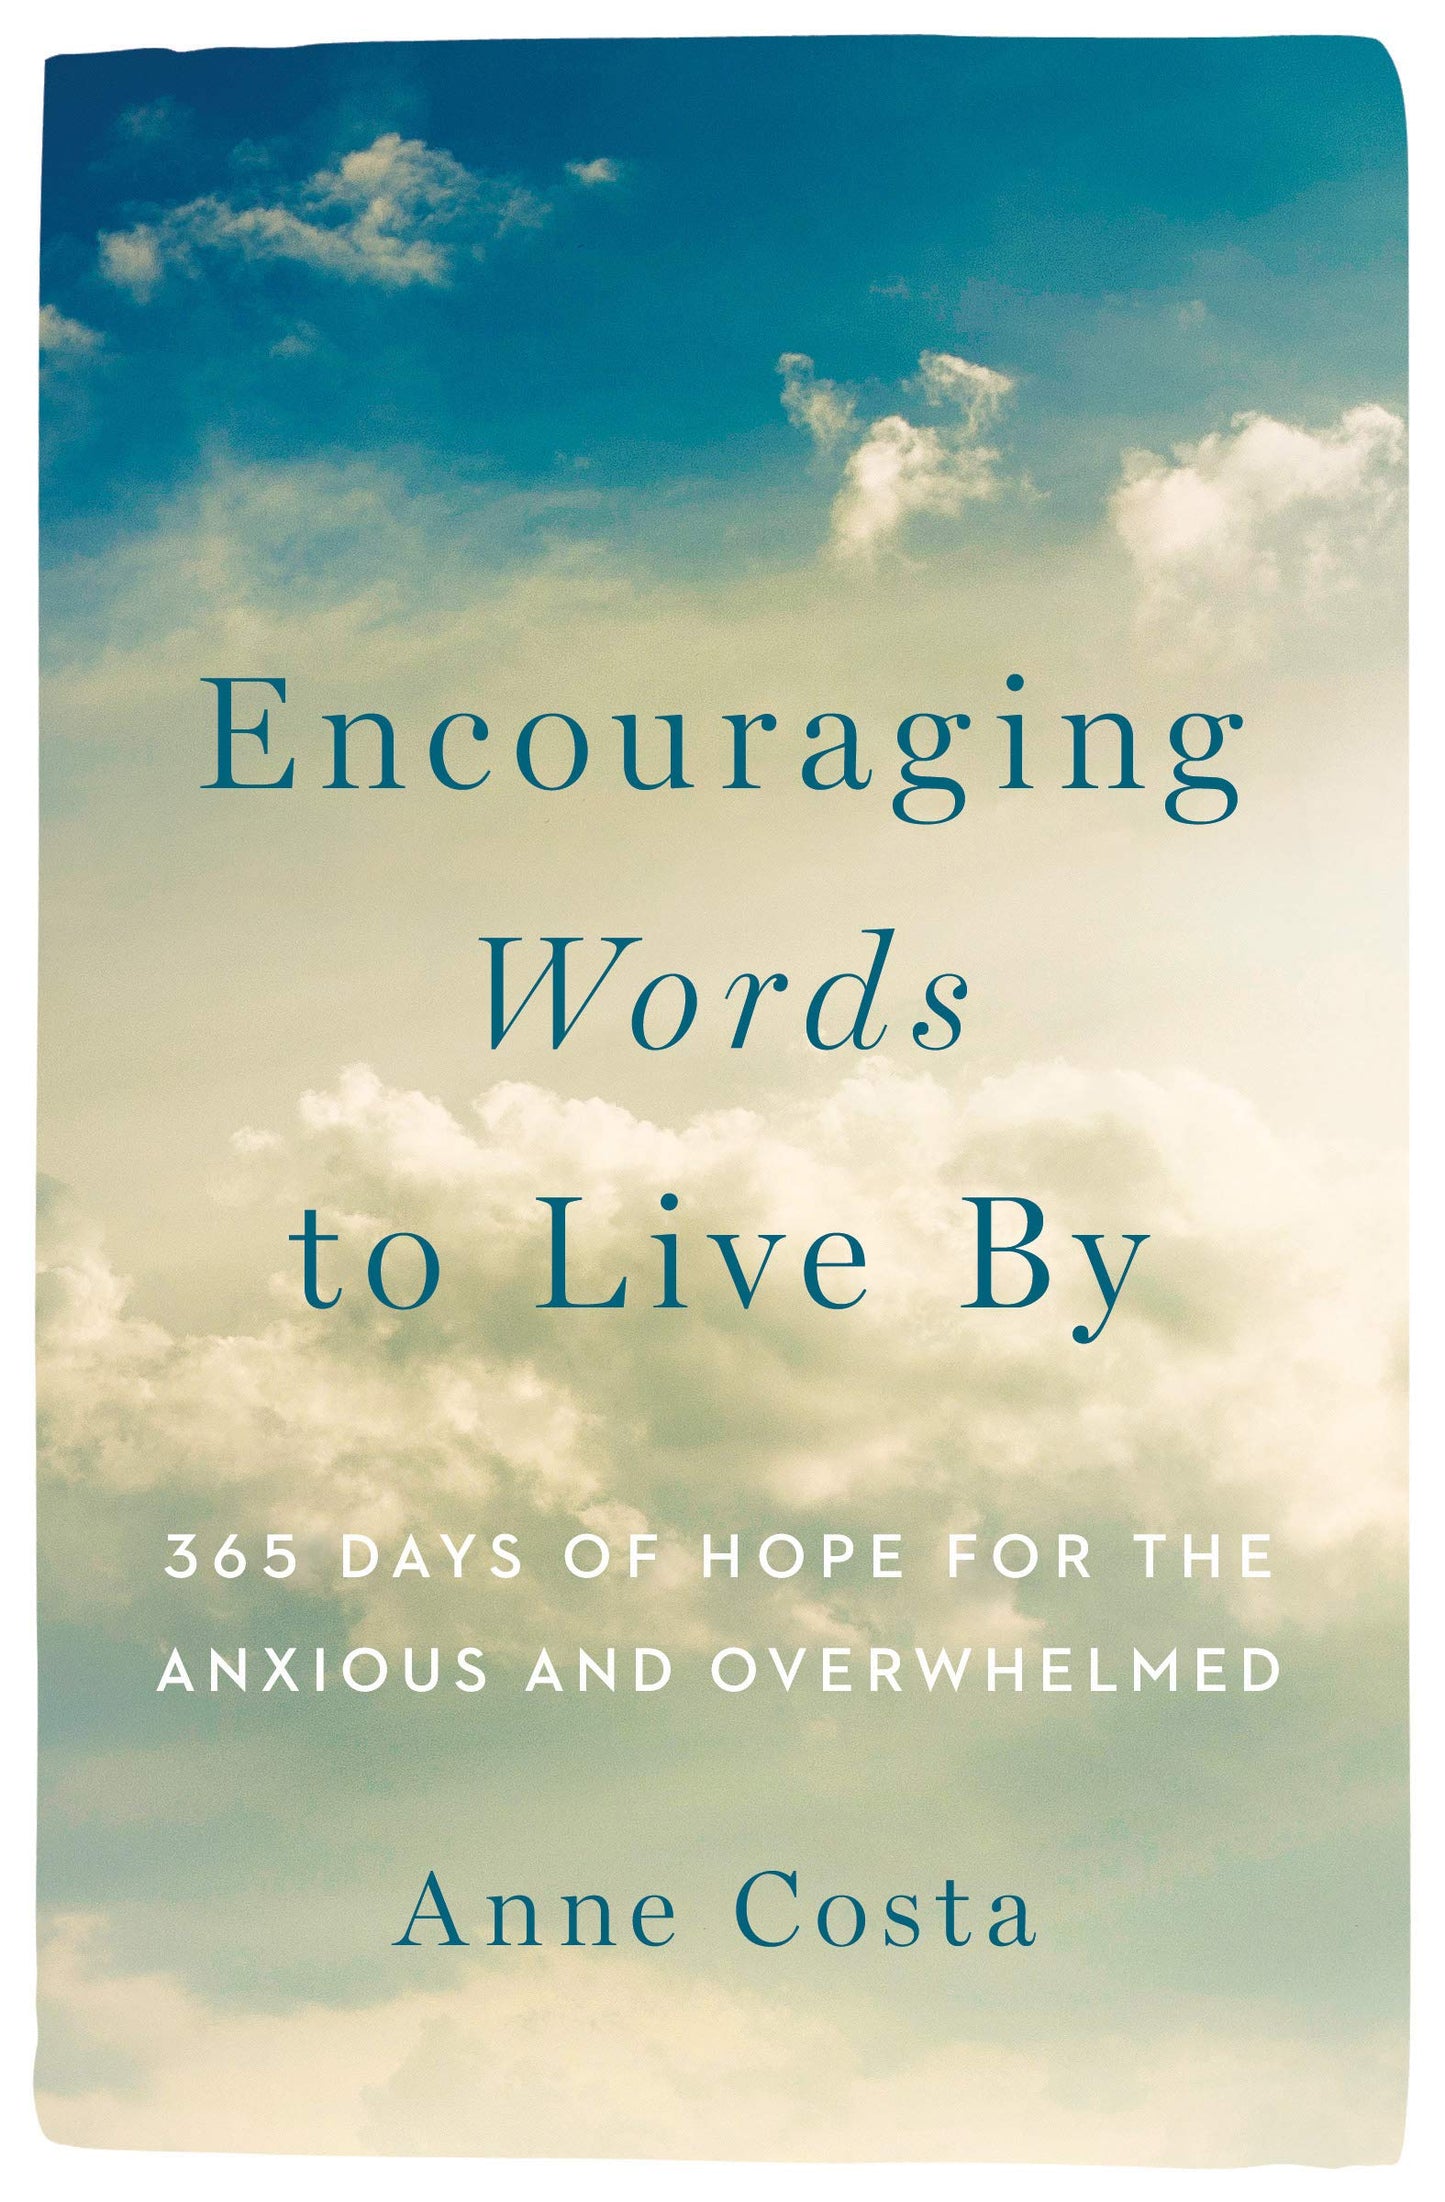 Encouraging Words To Live By 365 Days of Hope For the Anxious & Overwhelmed